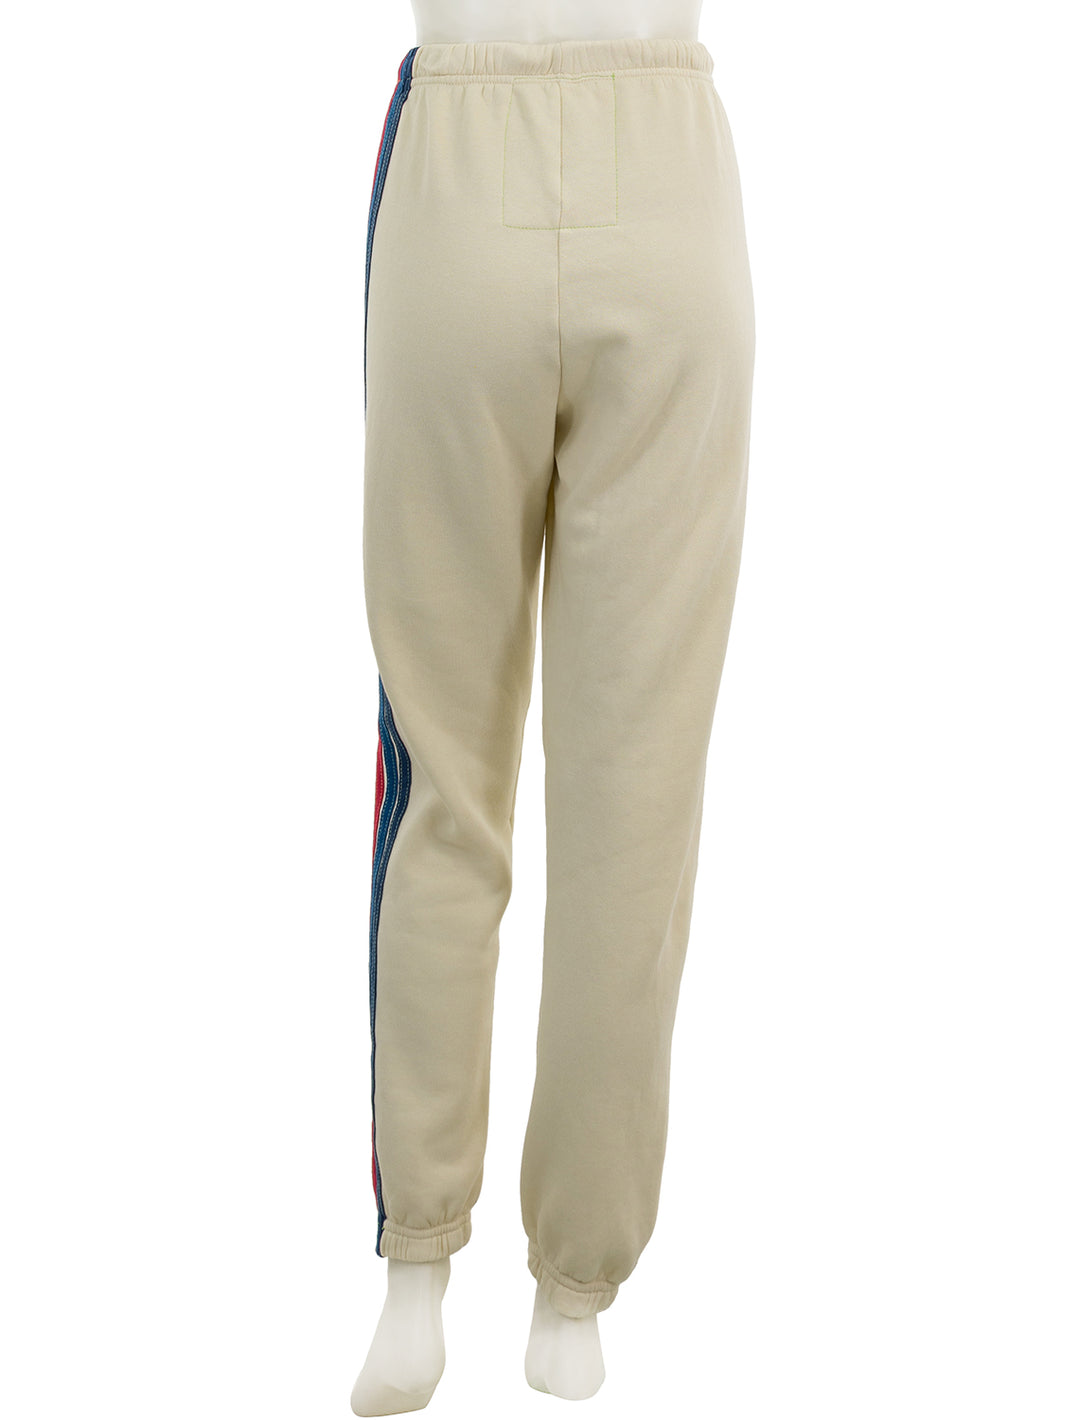 Back view of Aviator Nation's 5 stripe womens sweatpants in vintage white.